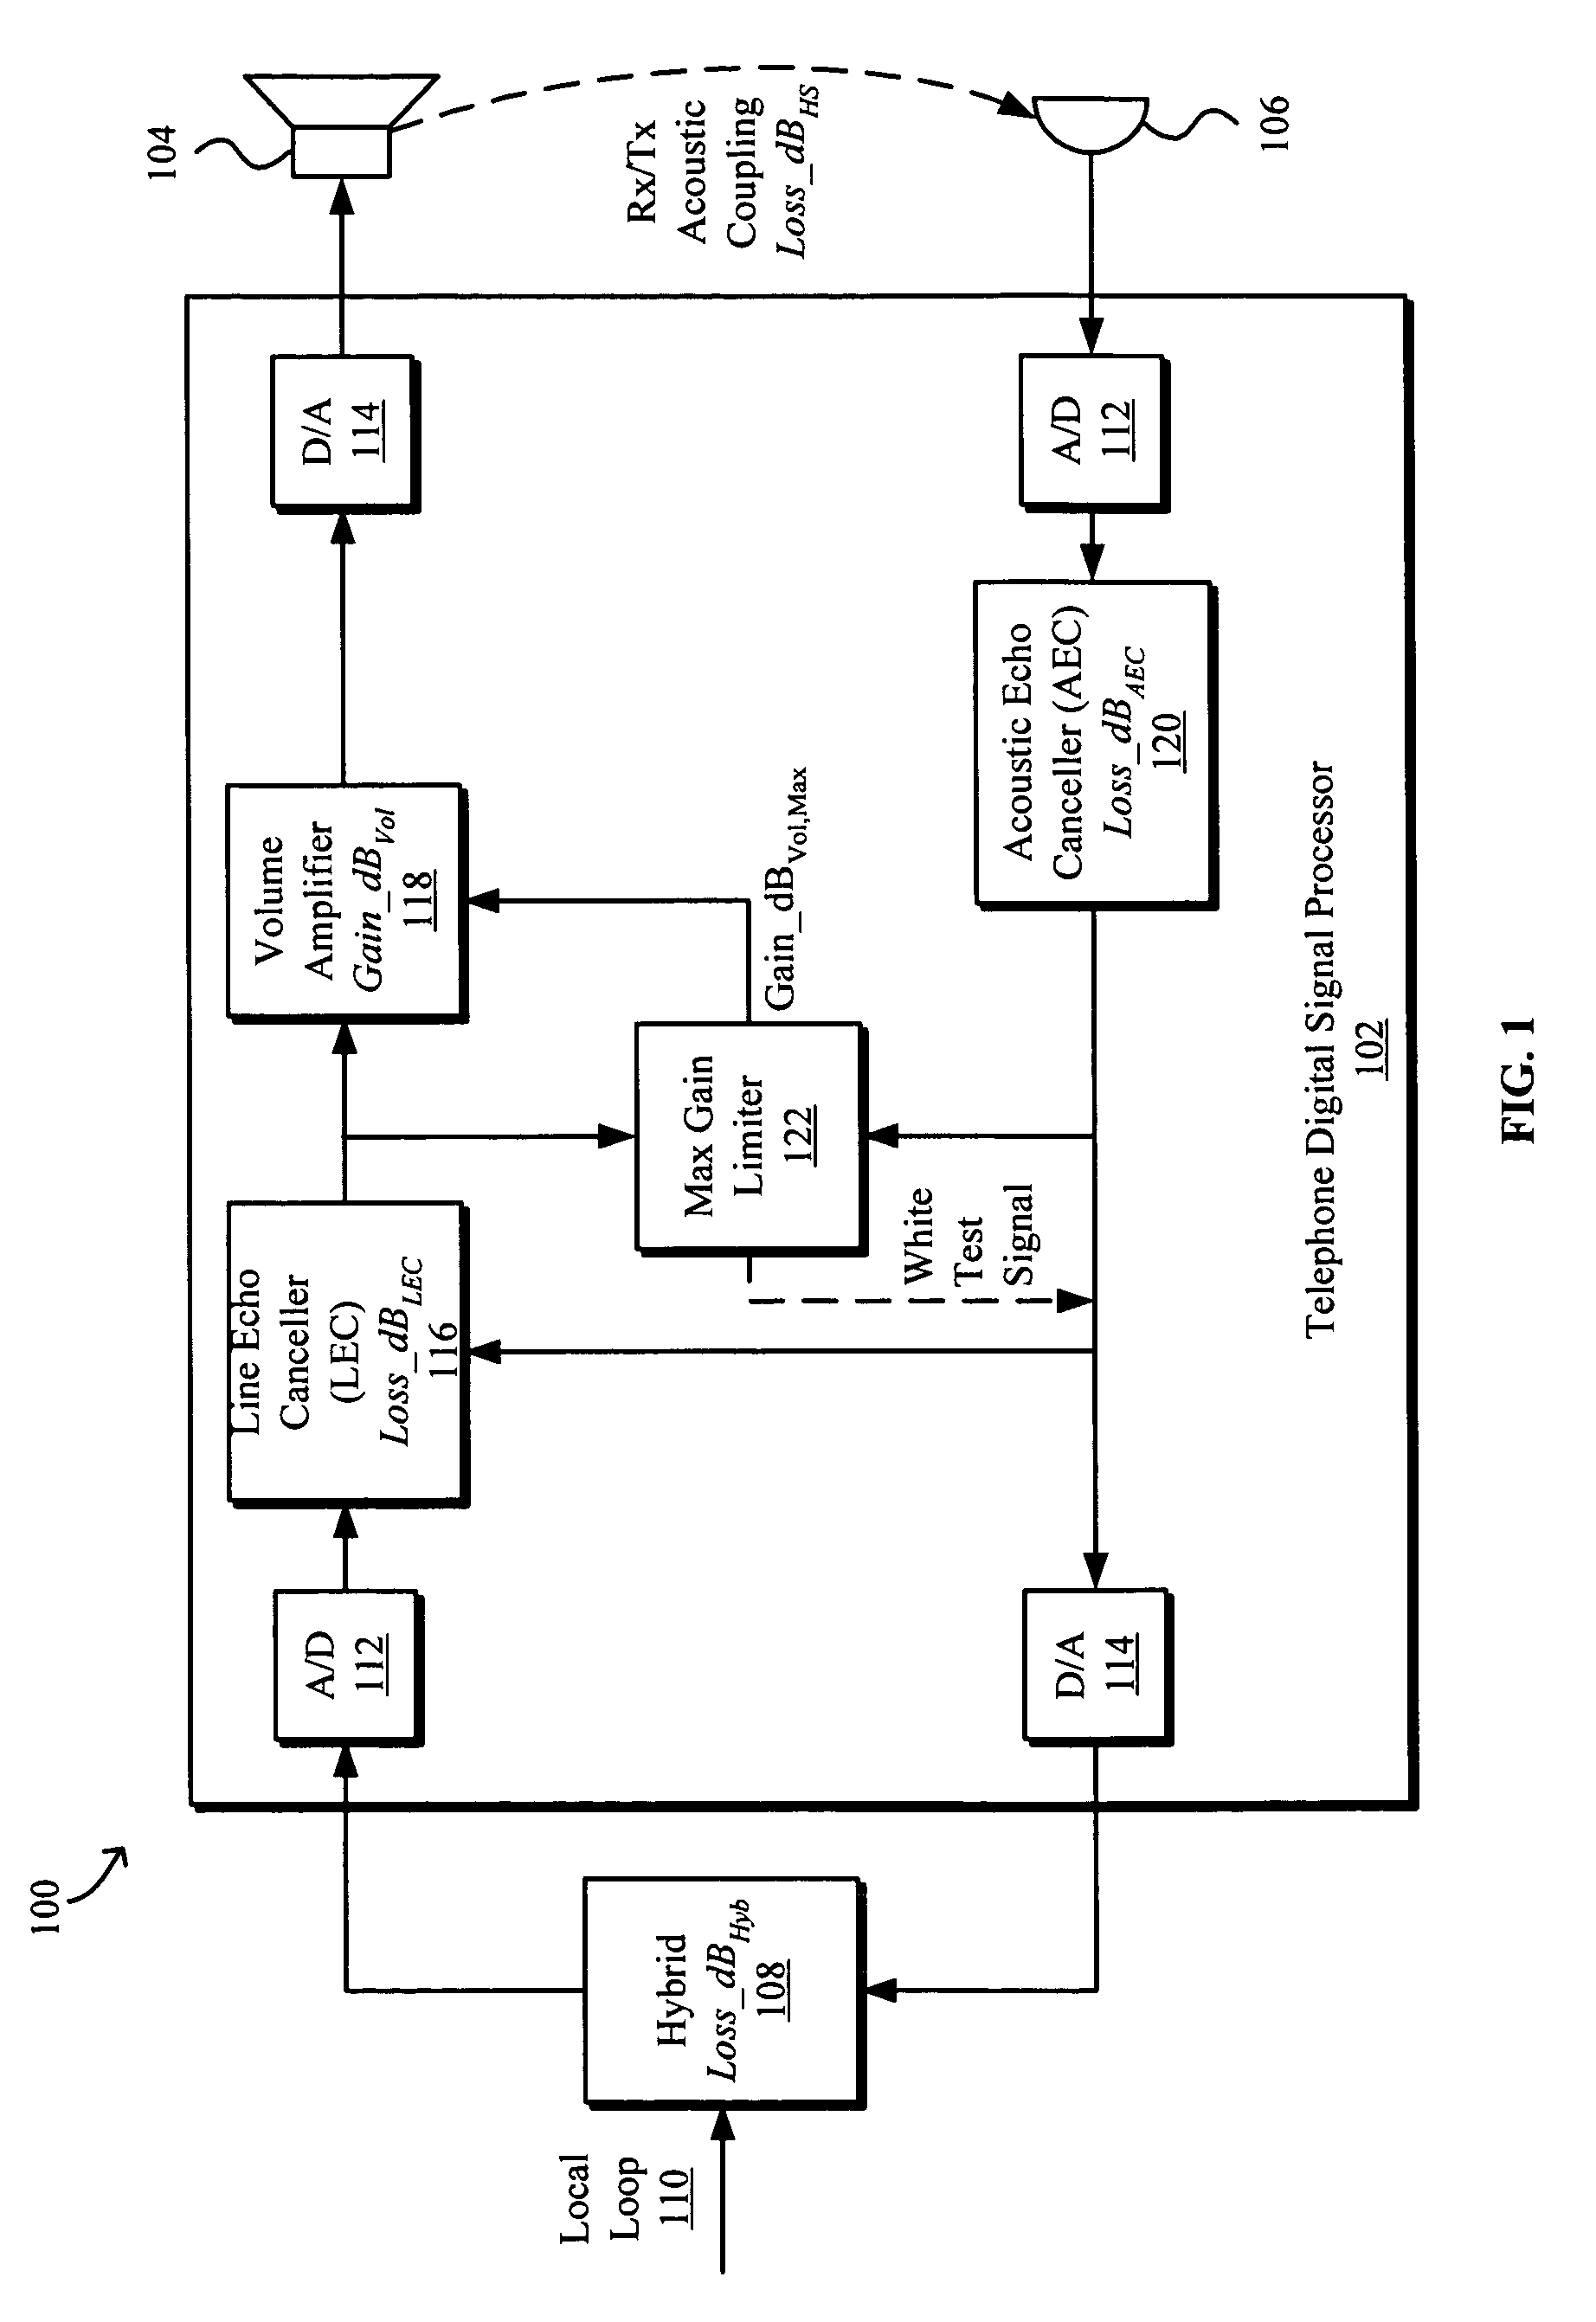 Limiting maximum gain in duplex communications devices including telephone sets